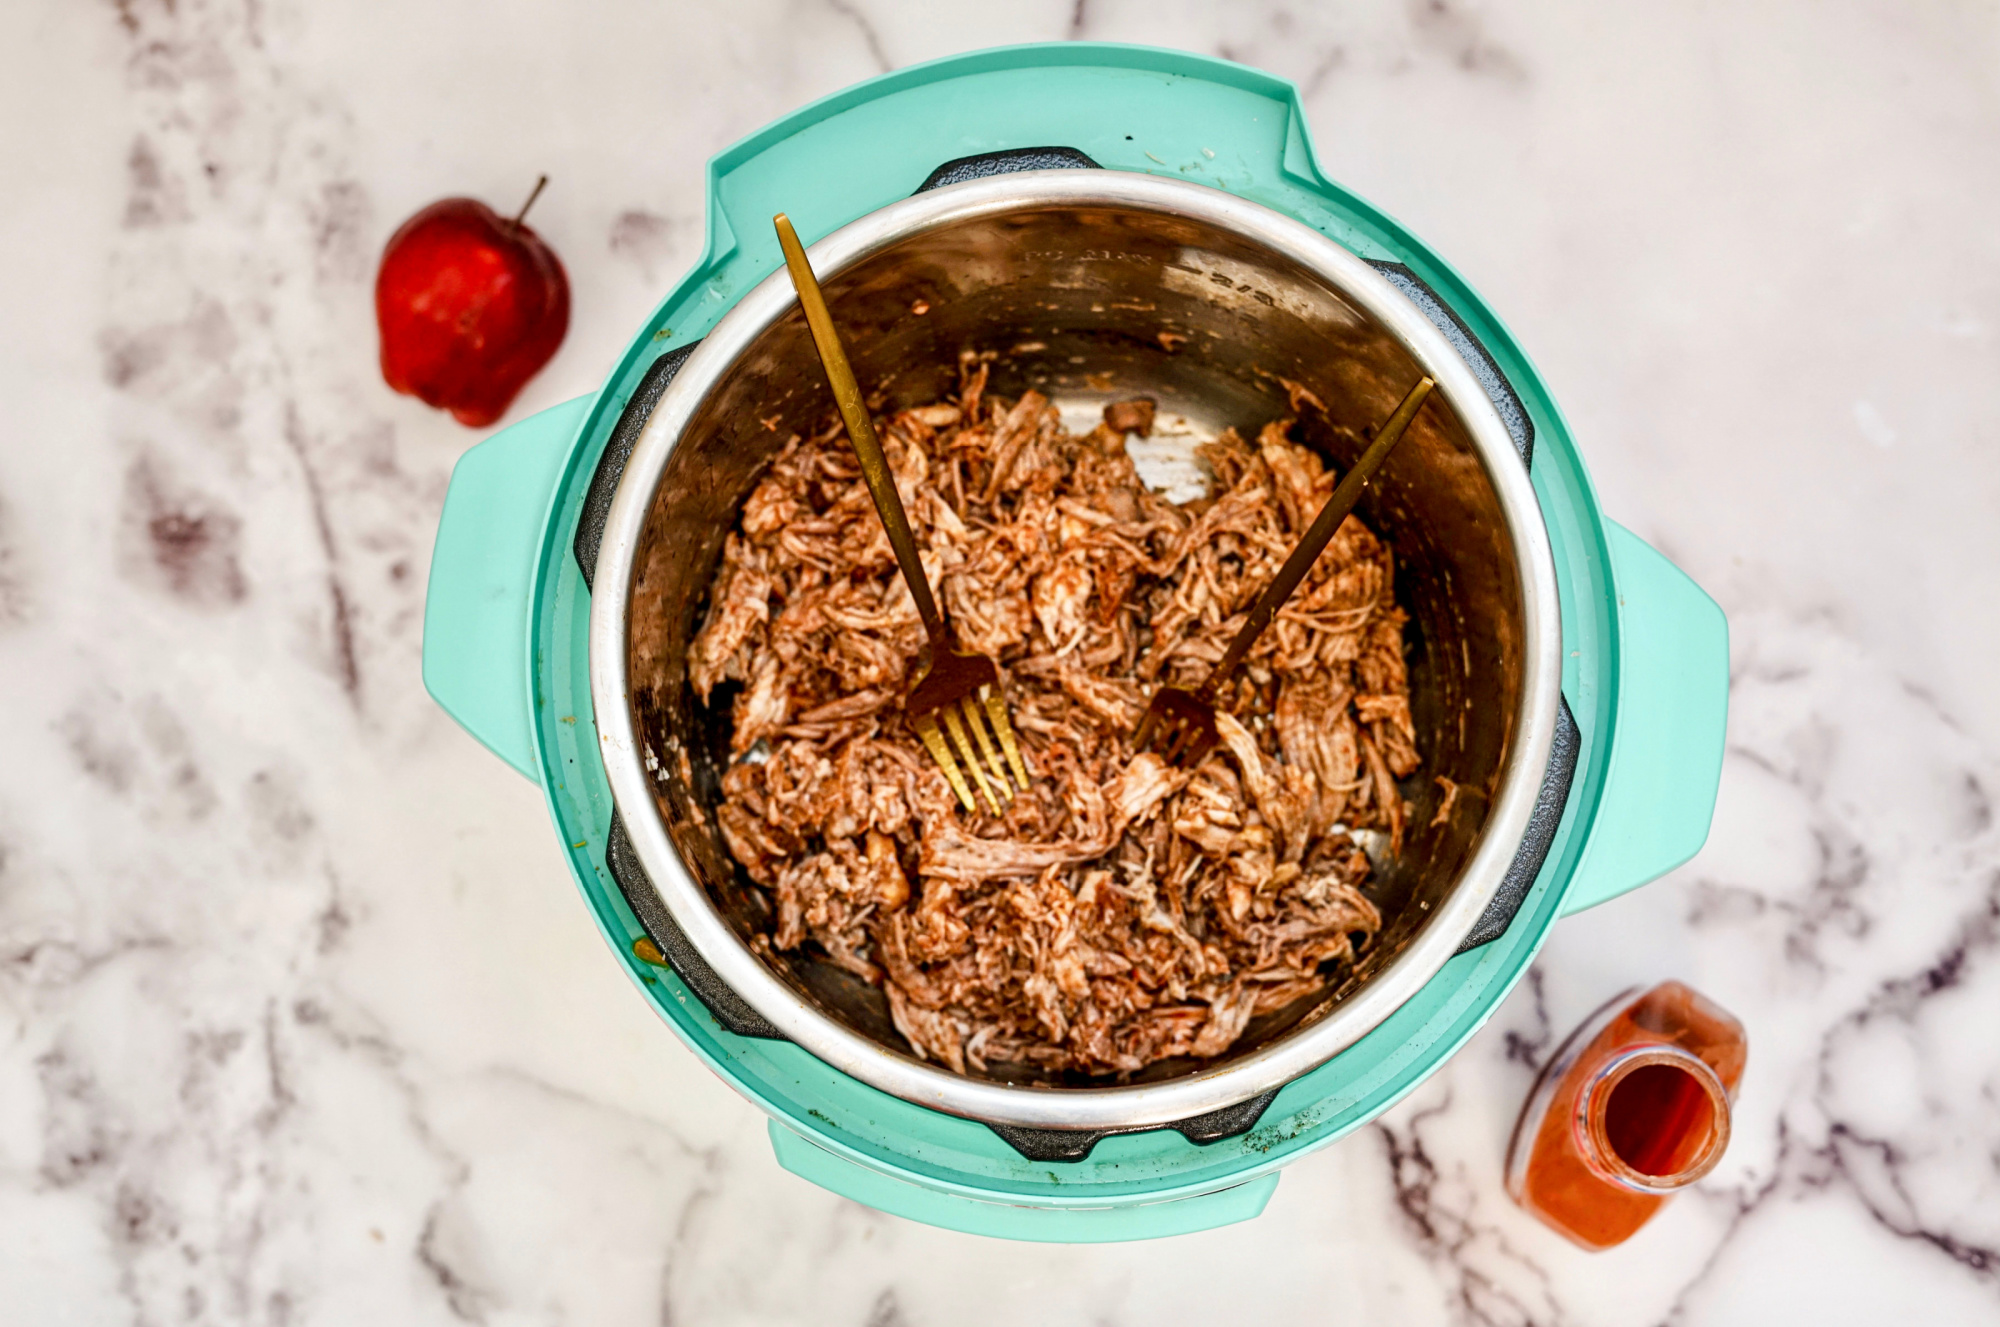 Weeknight Dinner: Instant Pot Coca~Cola Pulled Pork